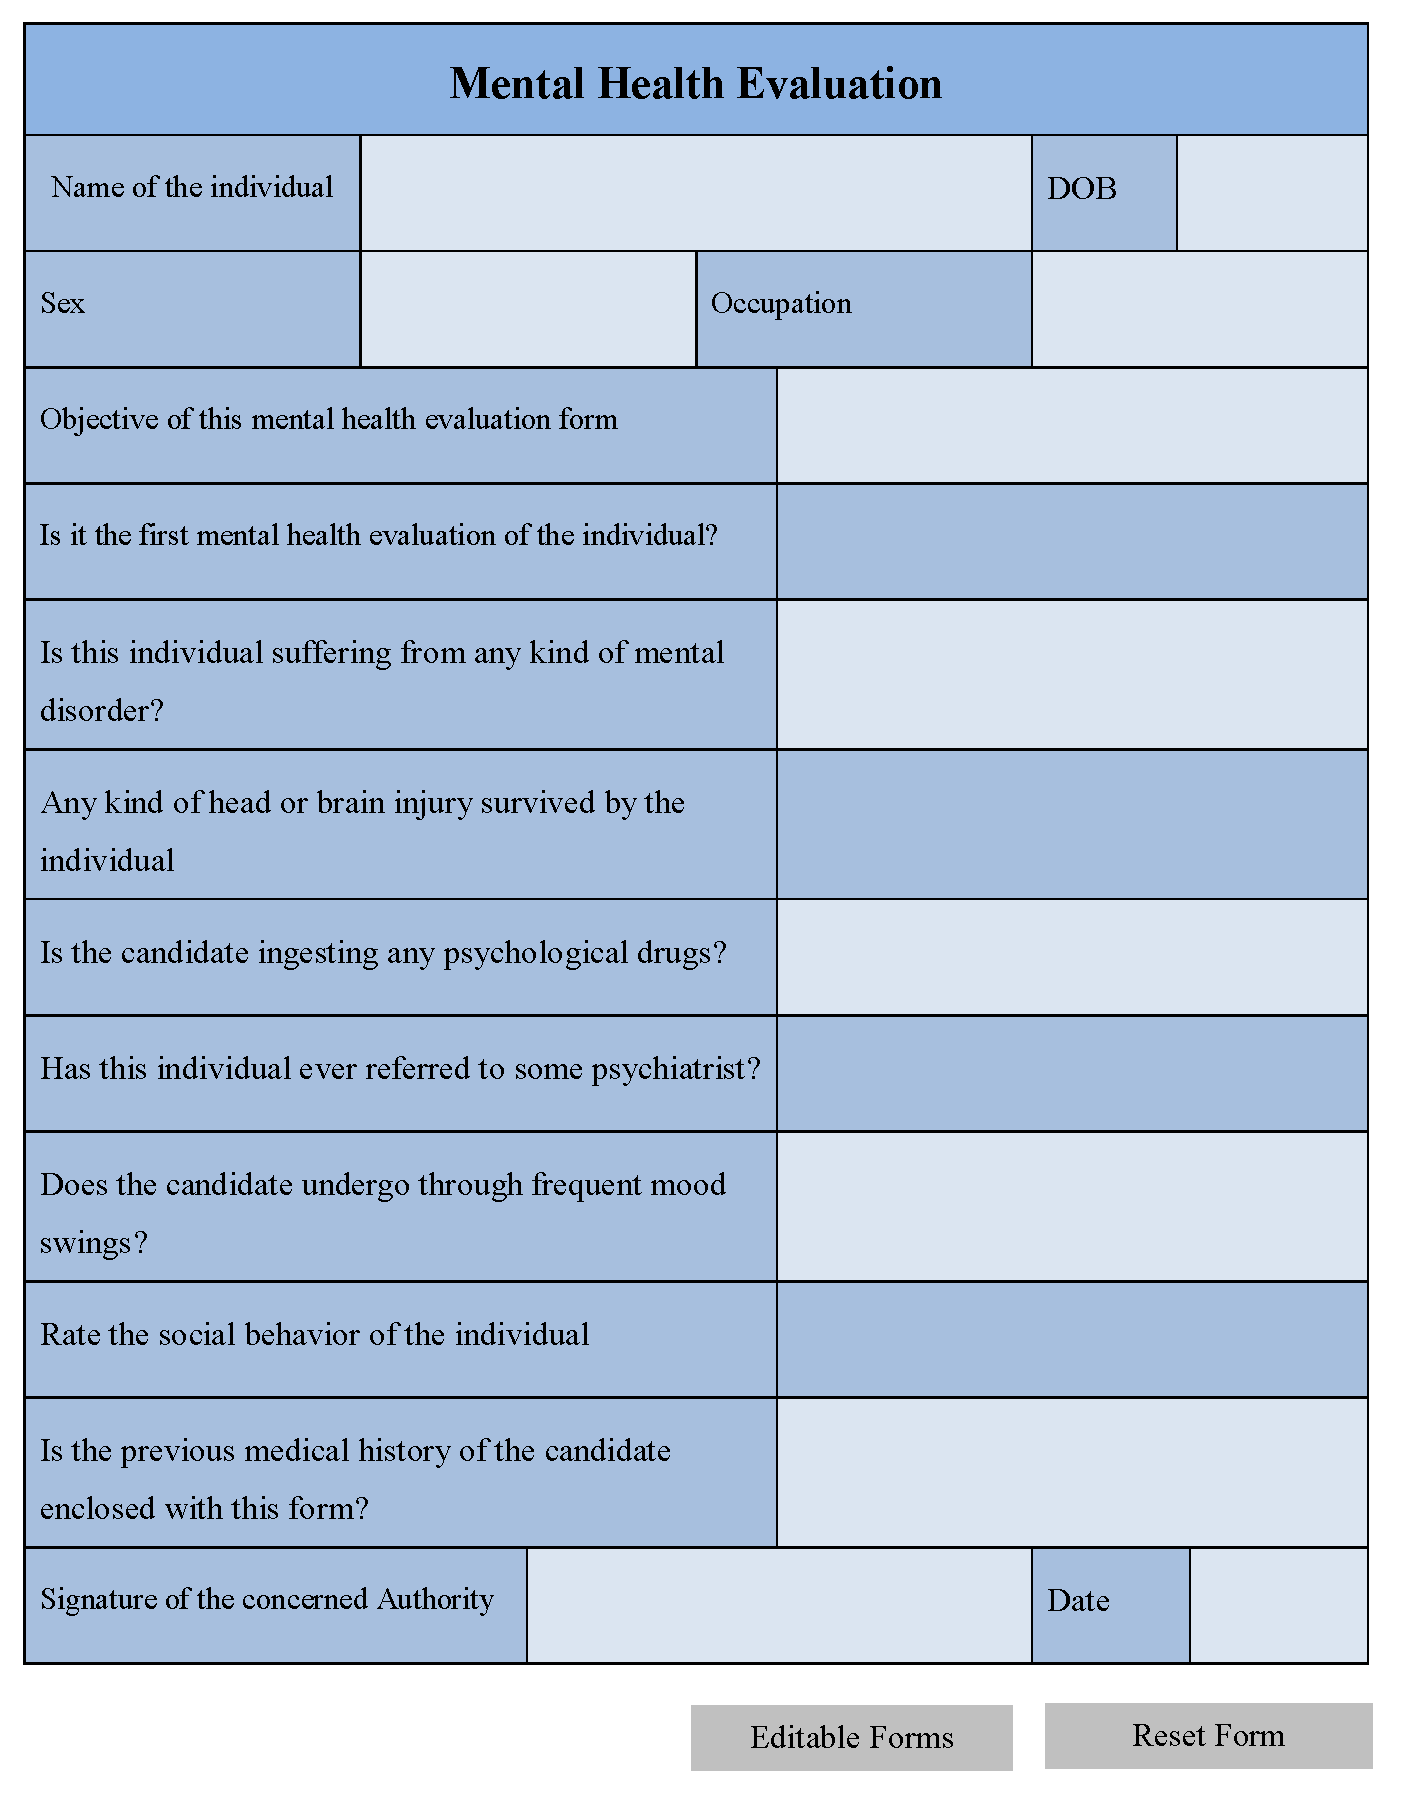 Mental Health Evaluation Form Fillable Printable Pdf And Forms The